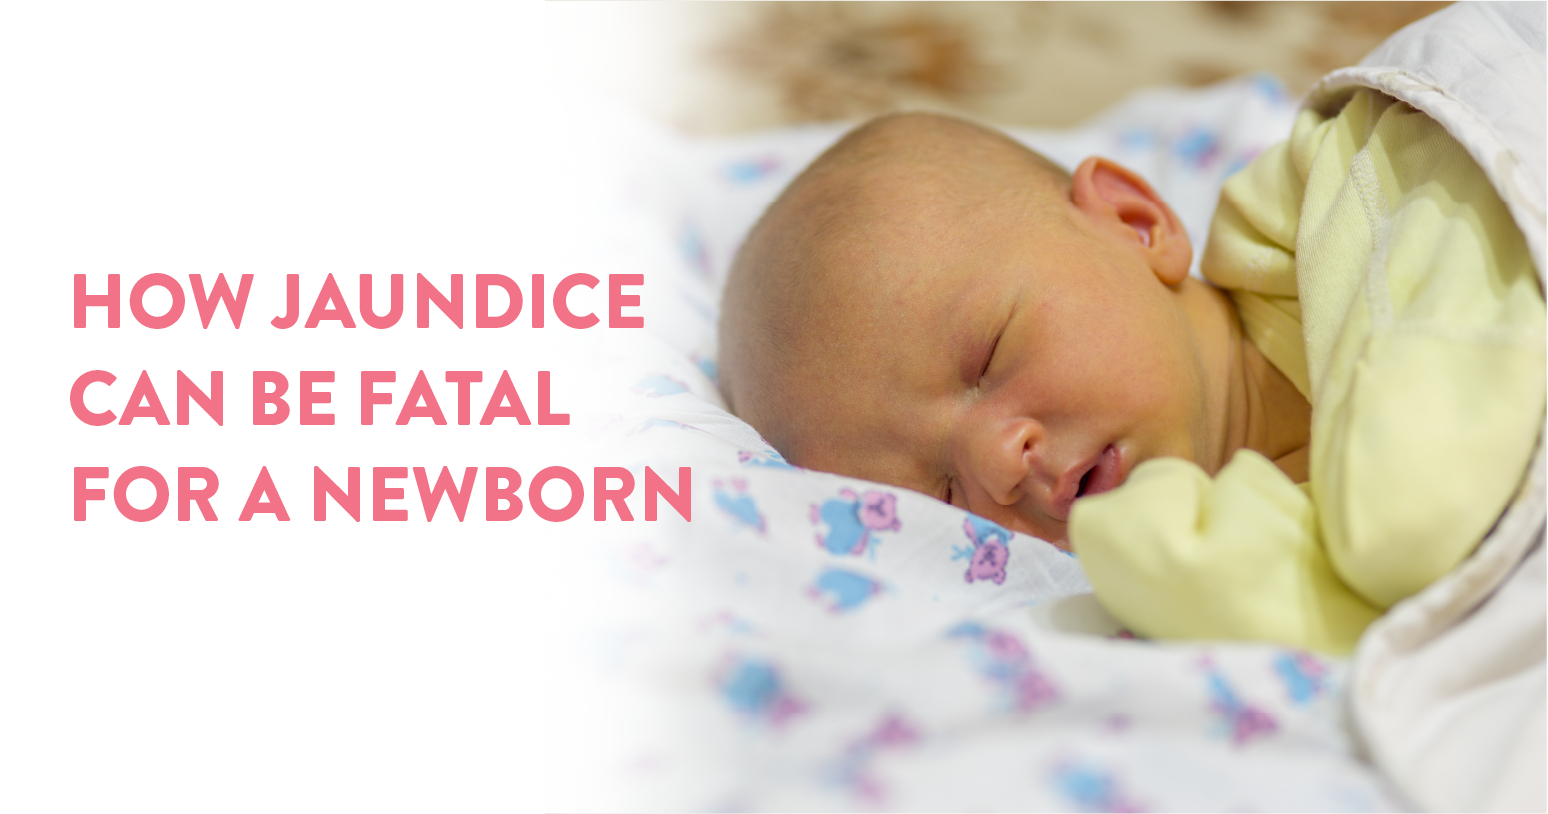 how jaundice can be fatal for a newborn